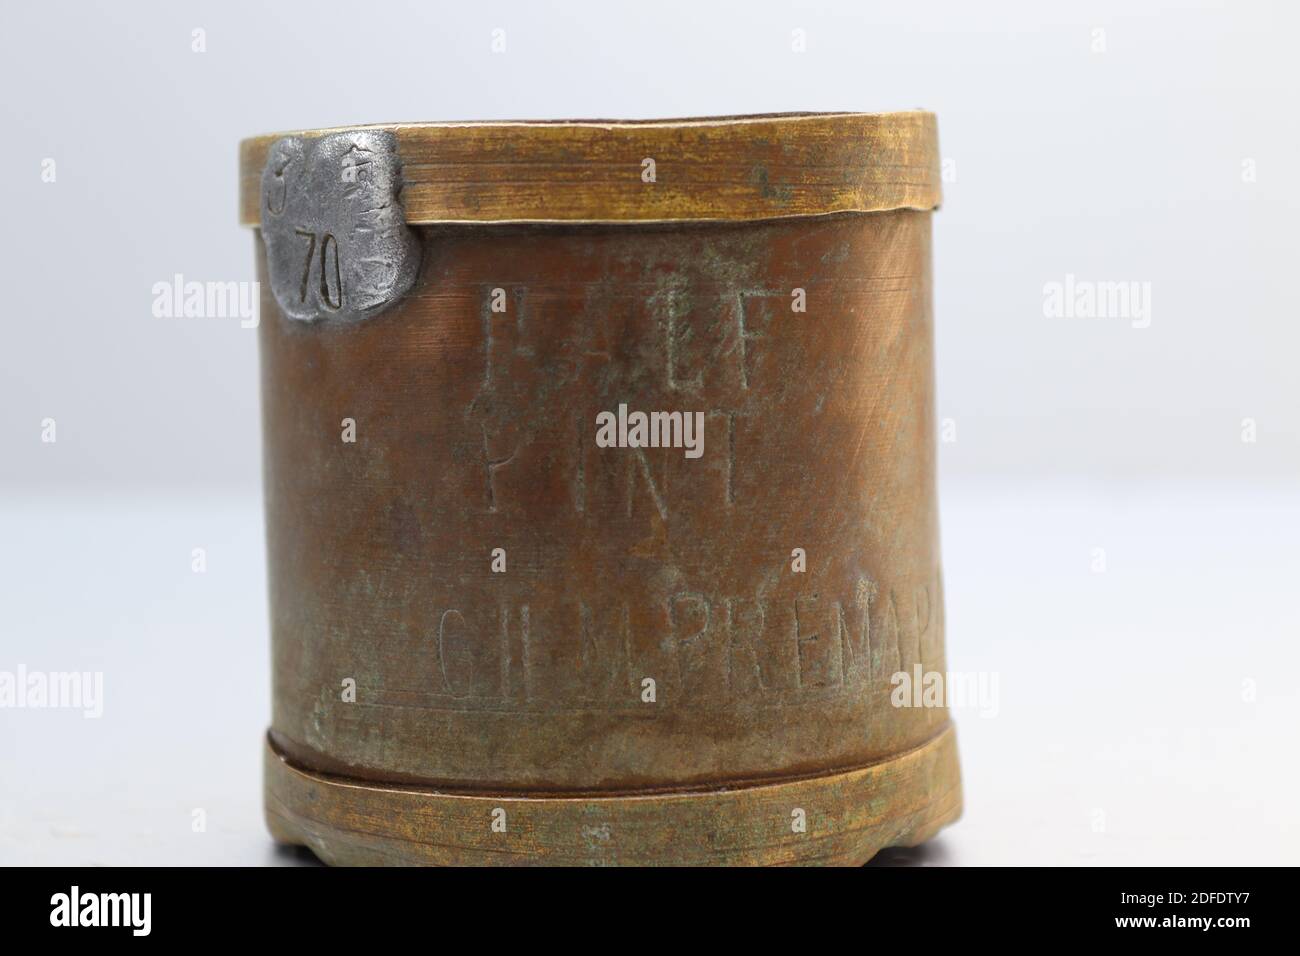 An old English measuring two units are here. These measuring units are mostly used for rice or other grains in the past or before metric system. Stock Photo